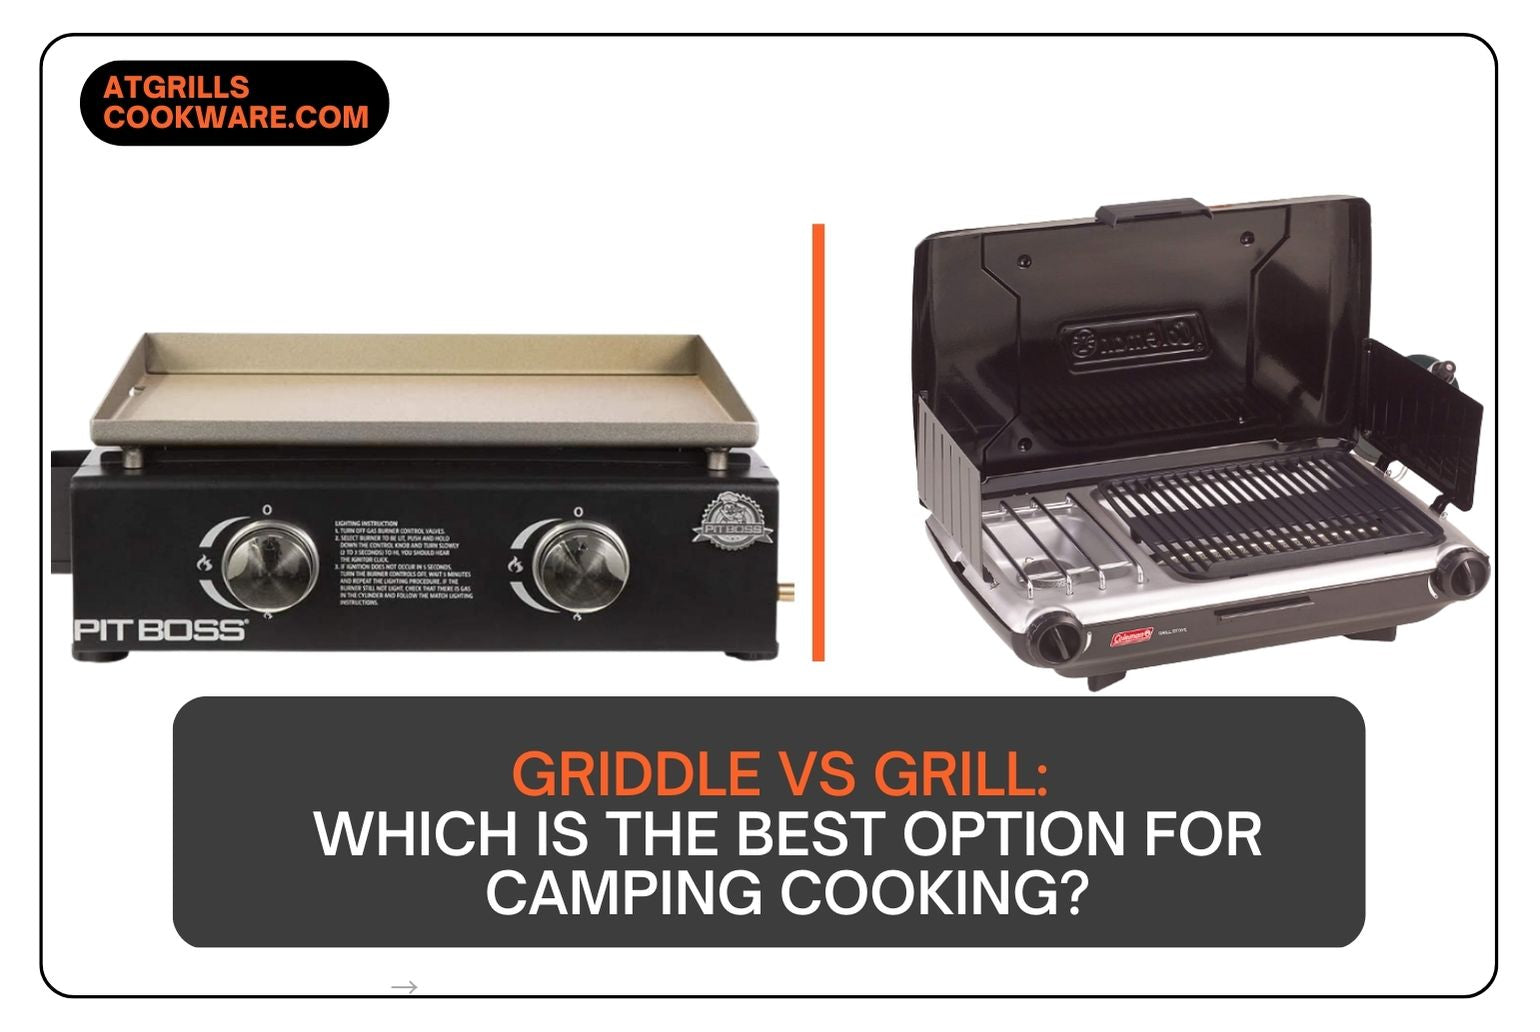 Is a griddle or grill better for camping